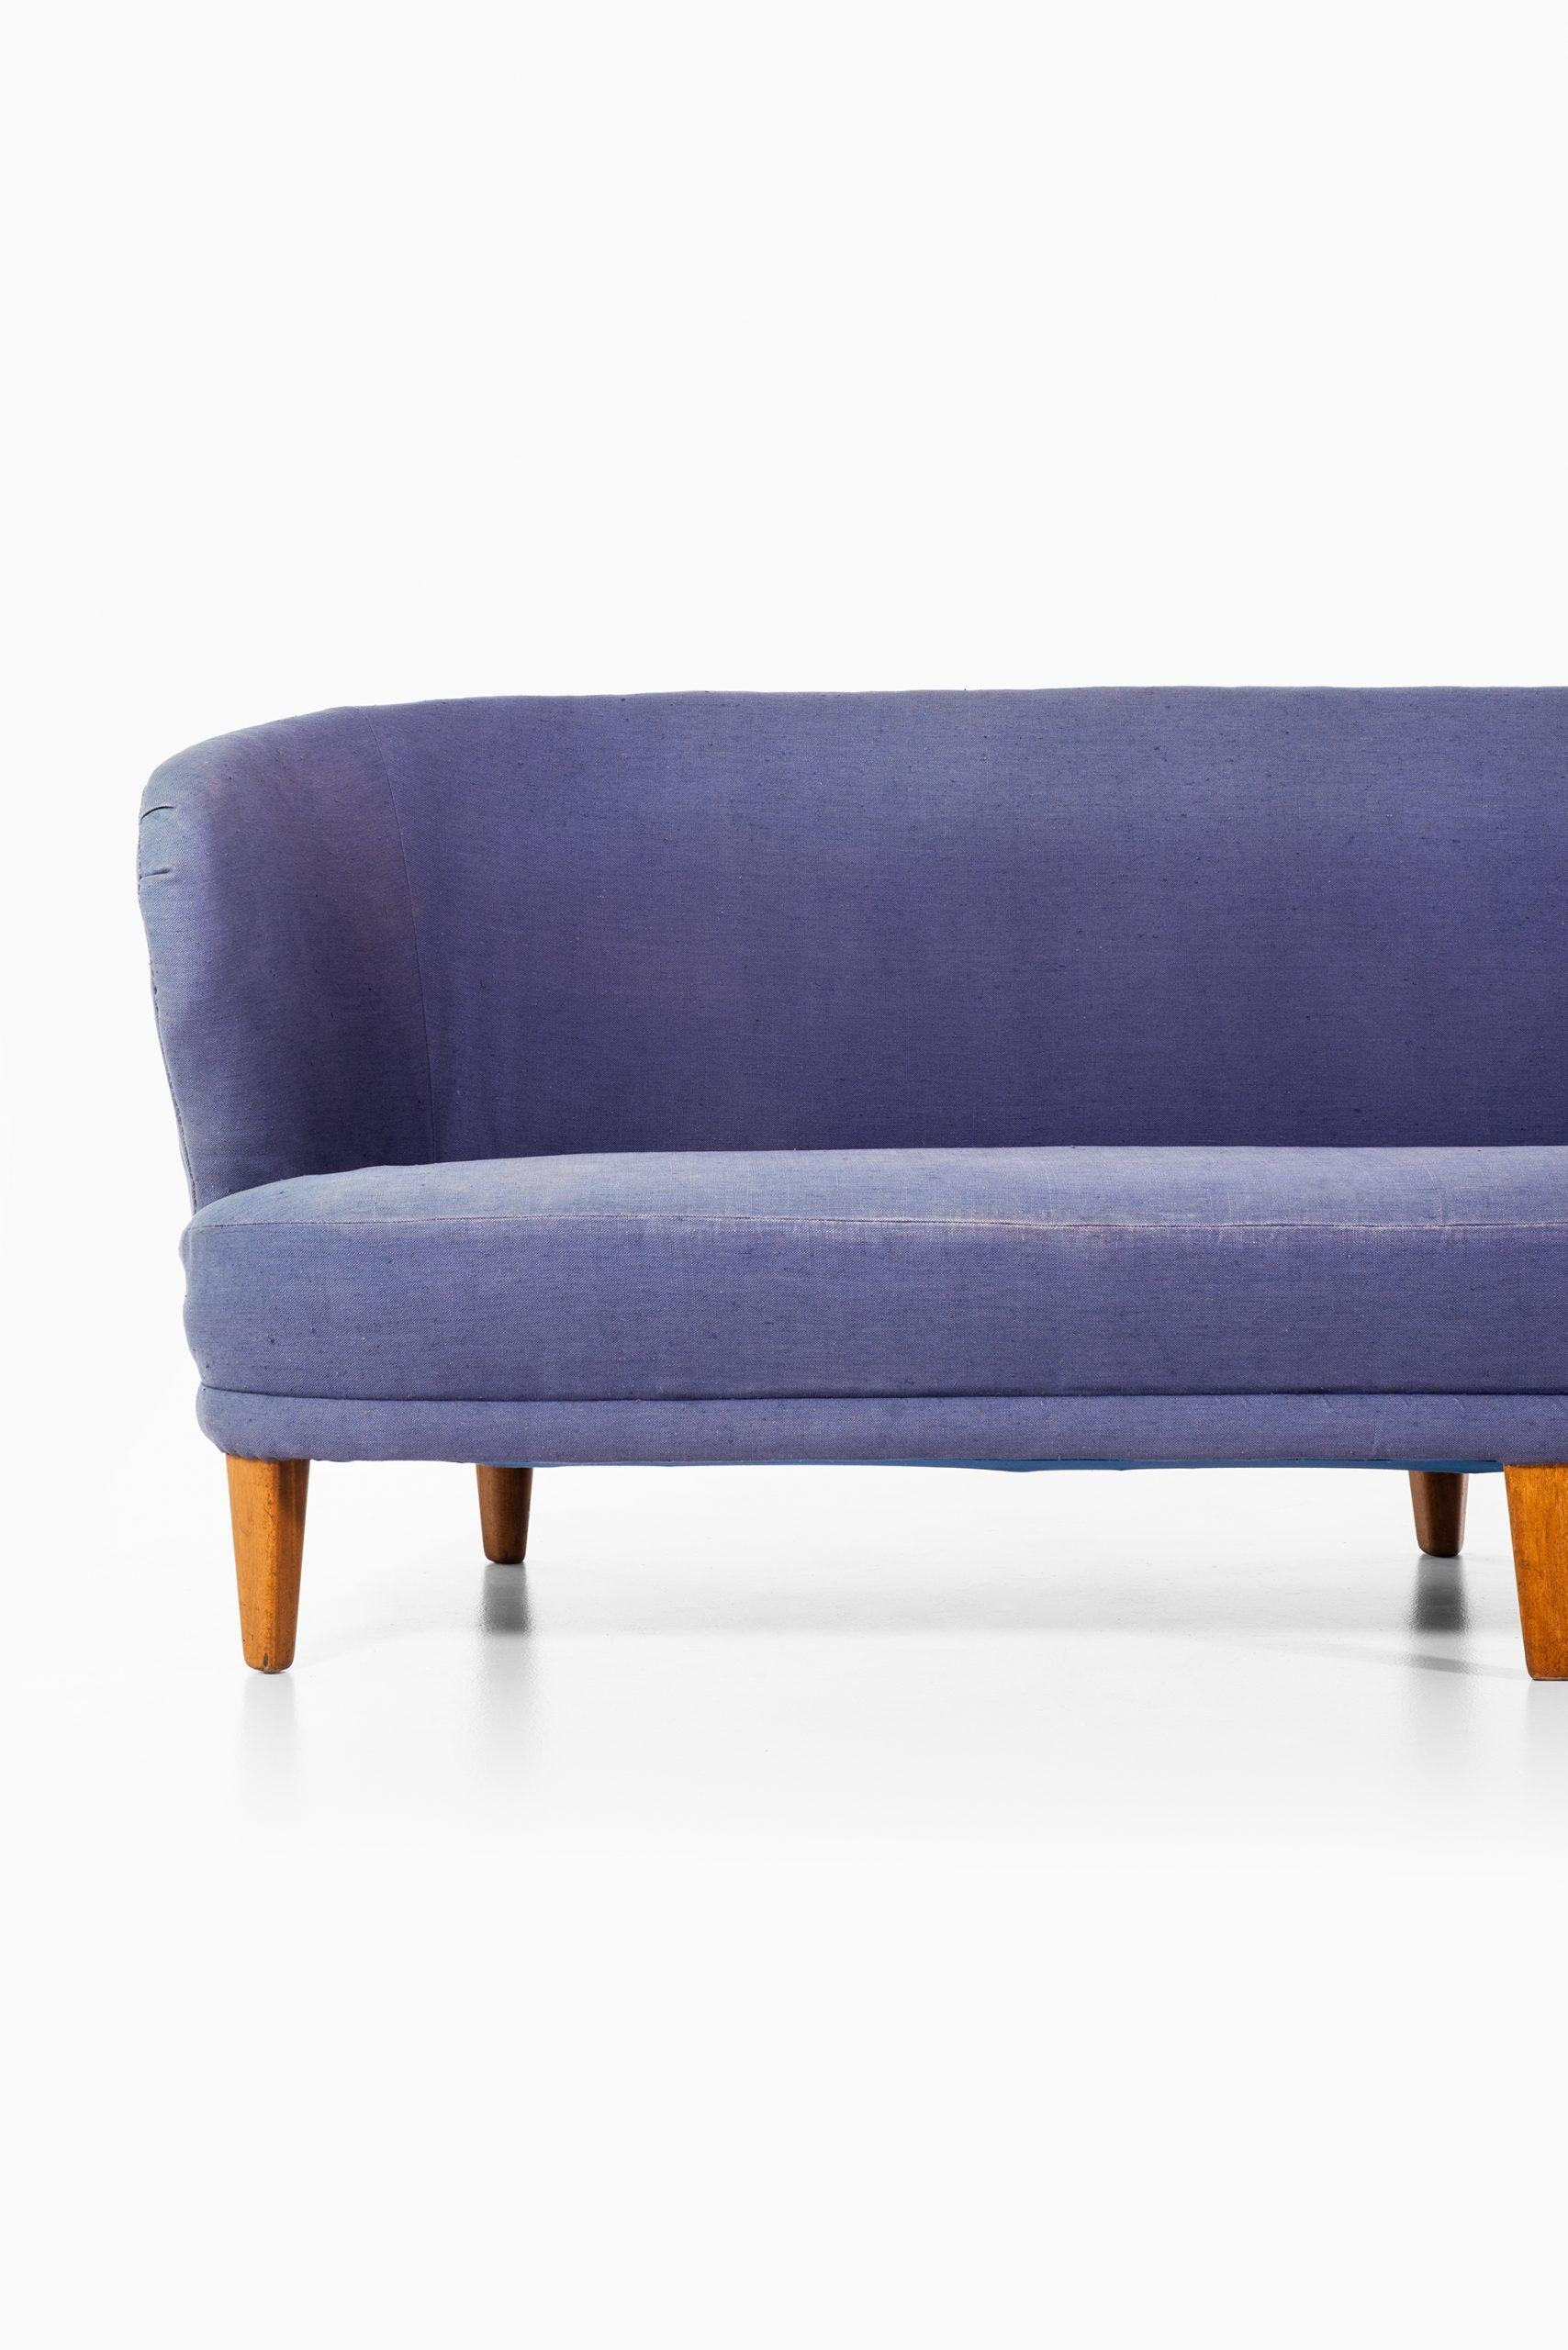 Rare and large version of the sofa model Berlin designed by Carl Malmsten. Produced by Carl Malmsten in Sweden.